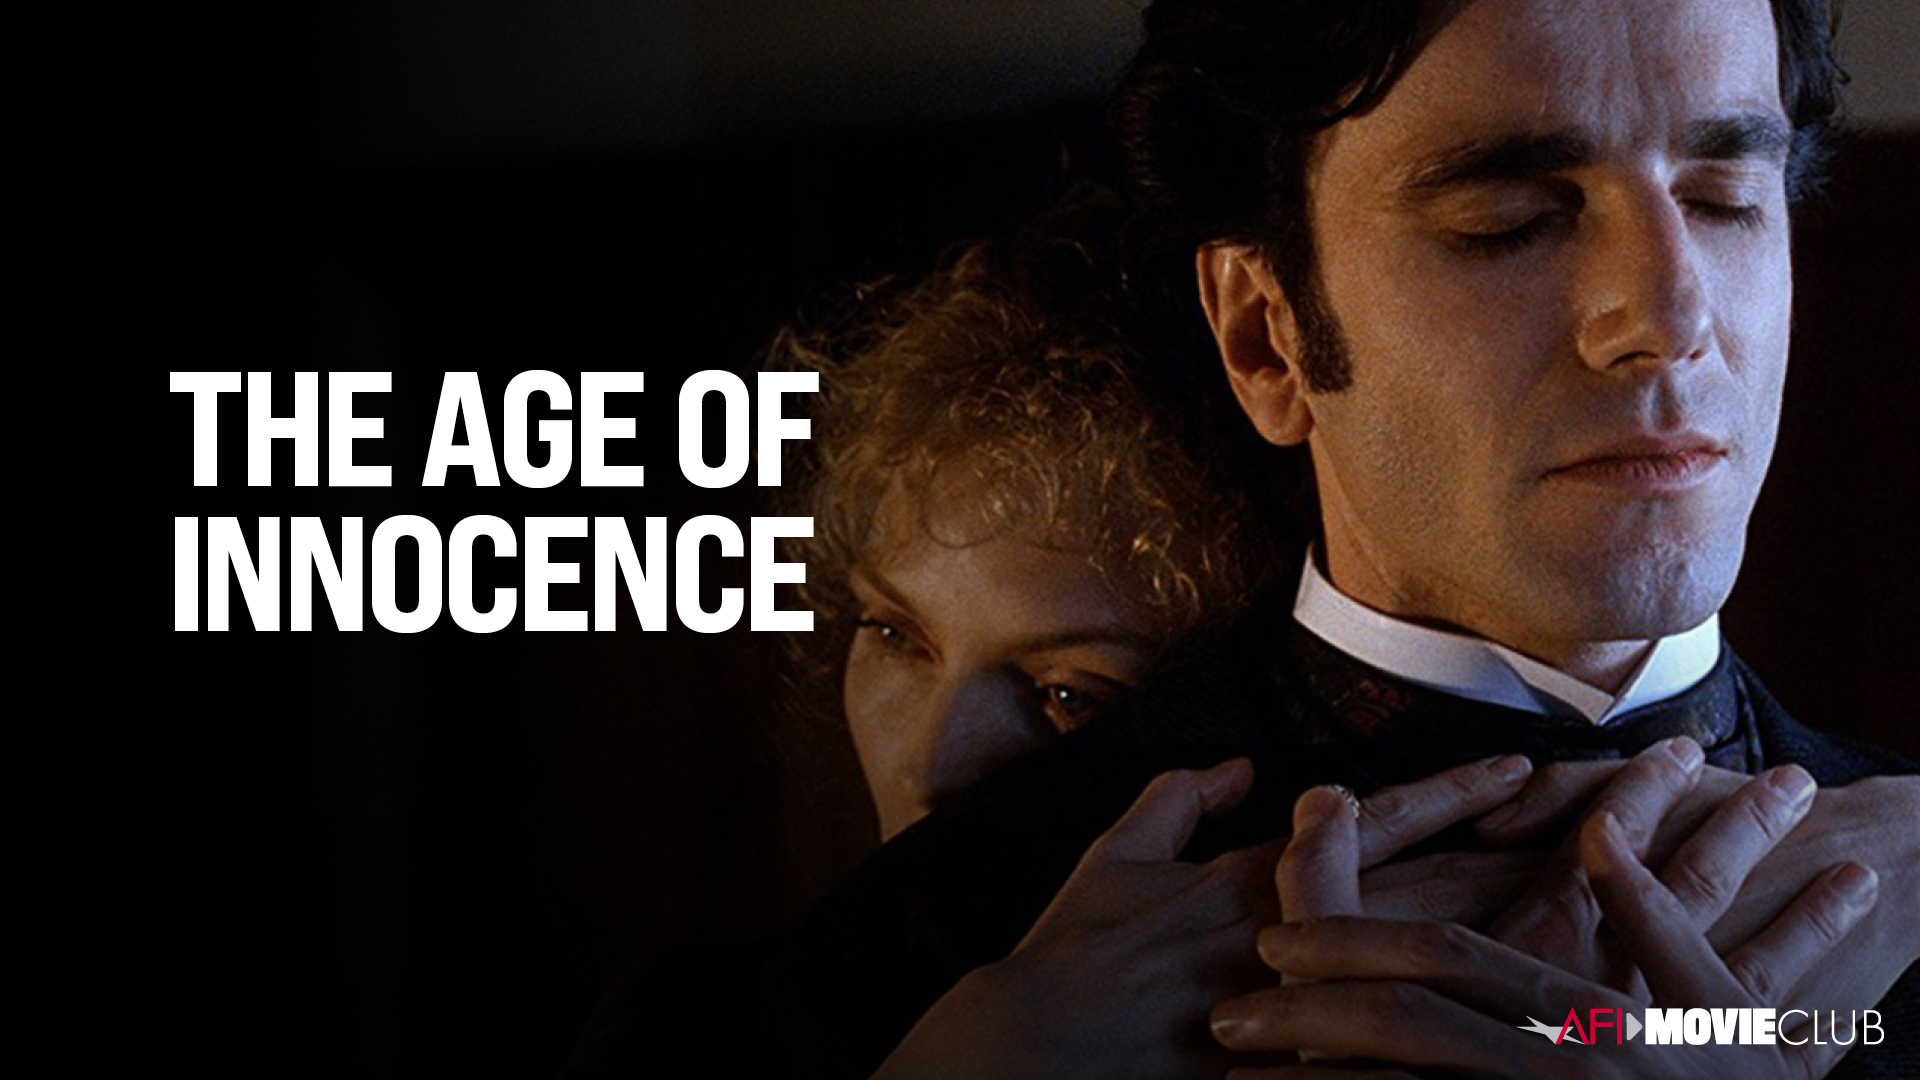 The Age of Innocence Film Still - Michelle Pfeiffer and Daniel Day-Lewis